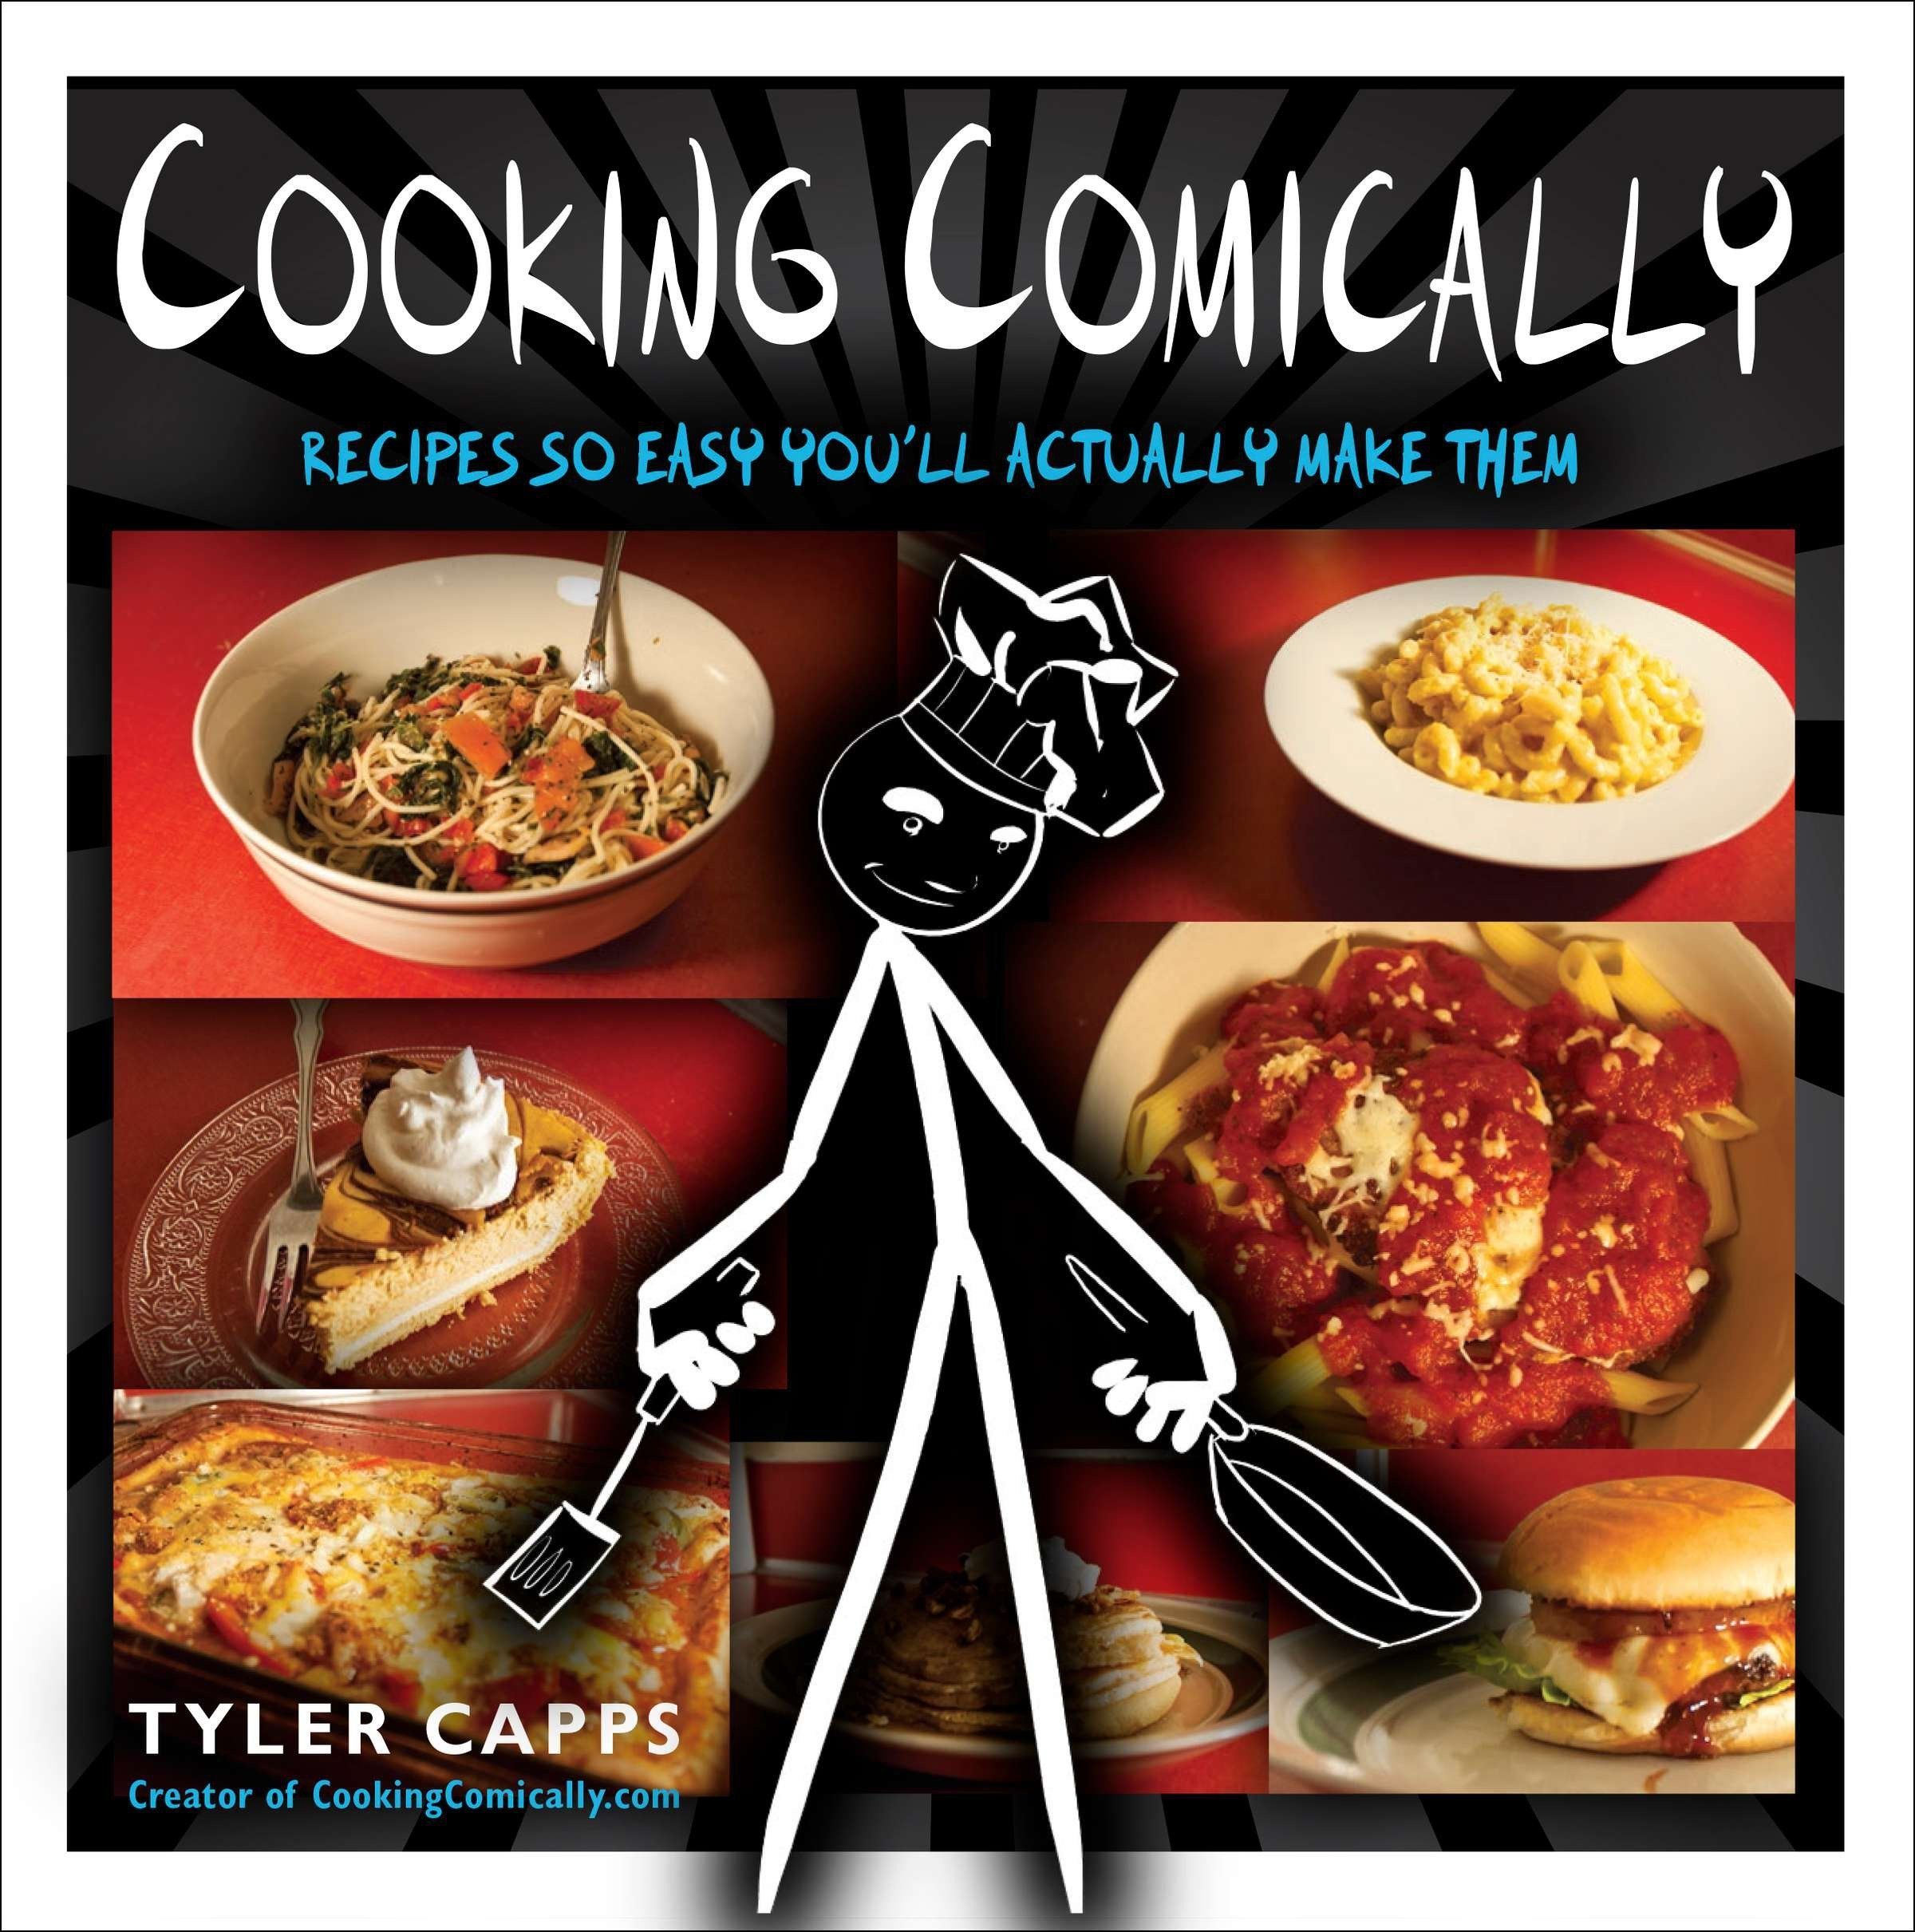 Cooking Comically by Tyler Capps